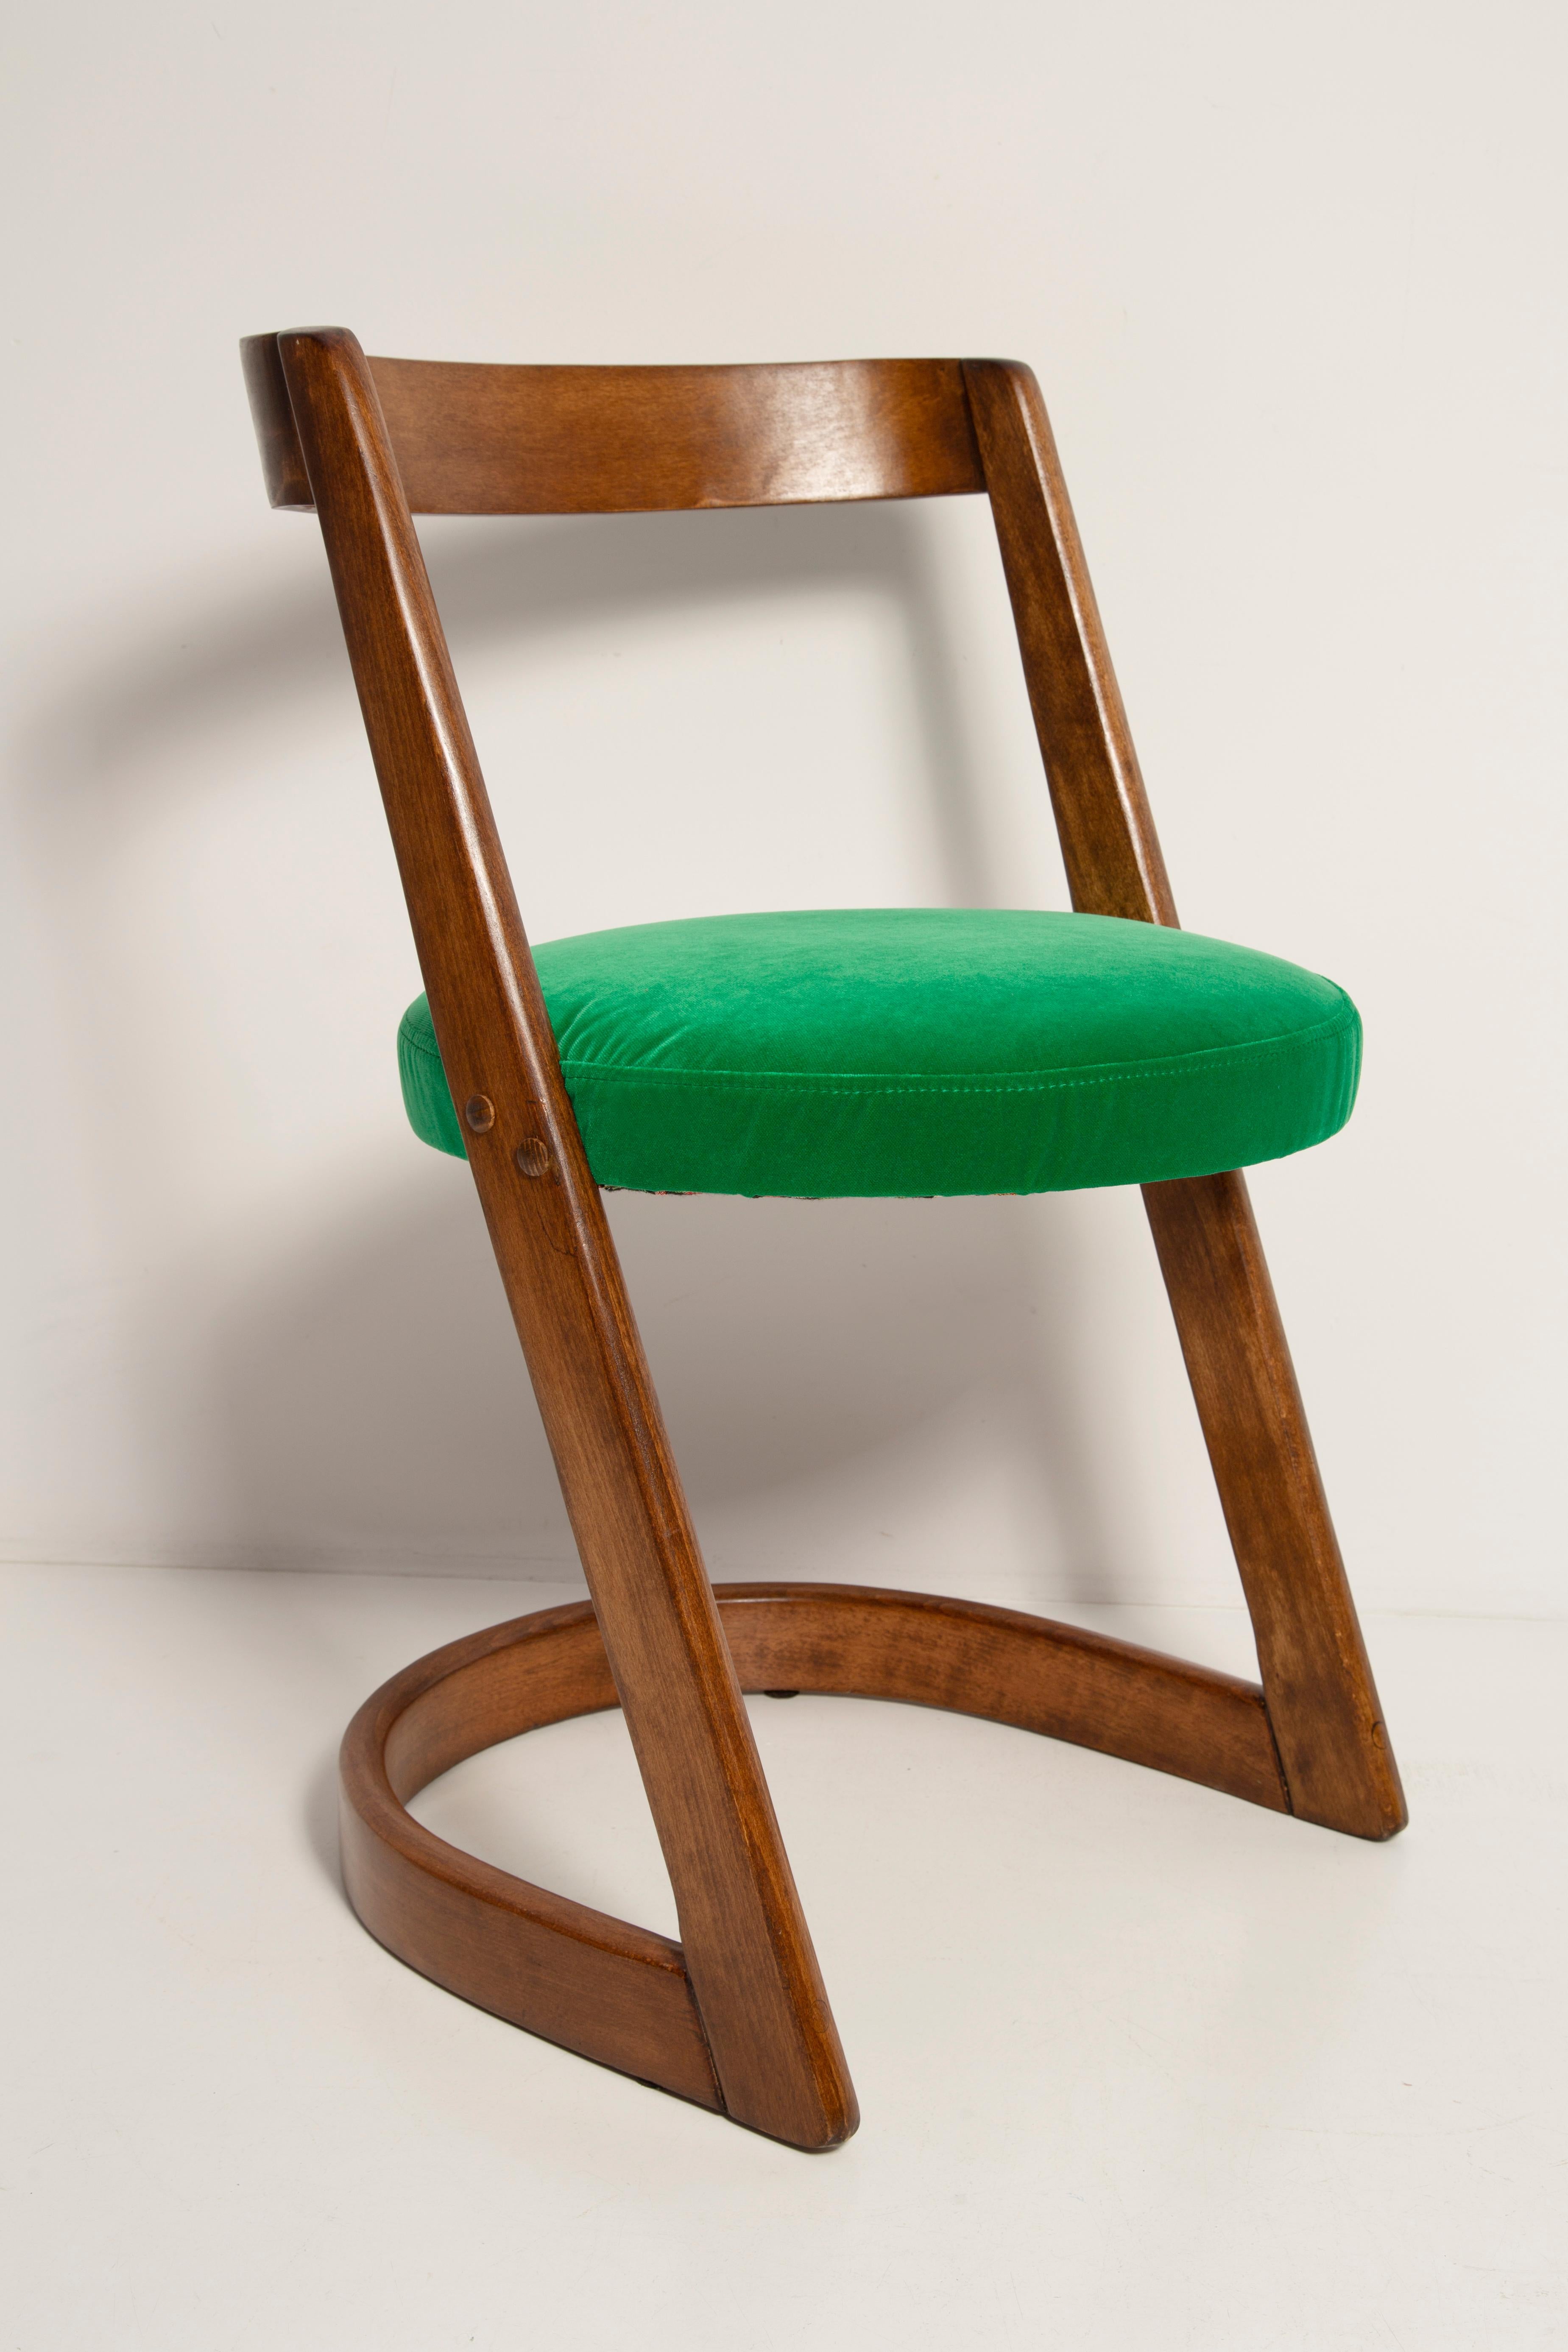 Hand-Crafted Midcentury Green Velvet Halfa Chair and Stool, Baumann, France, 1970s For Sale